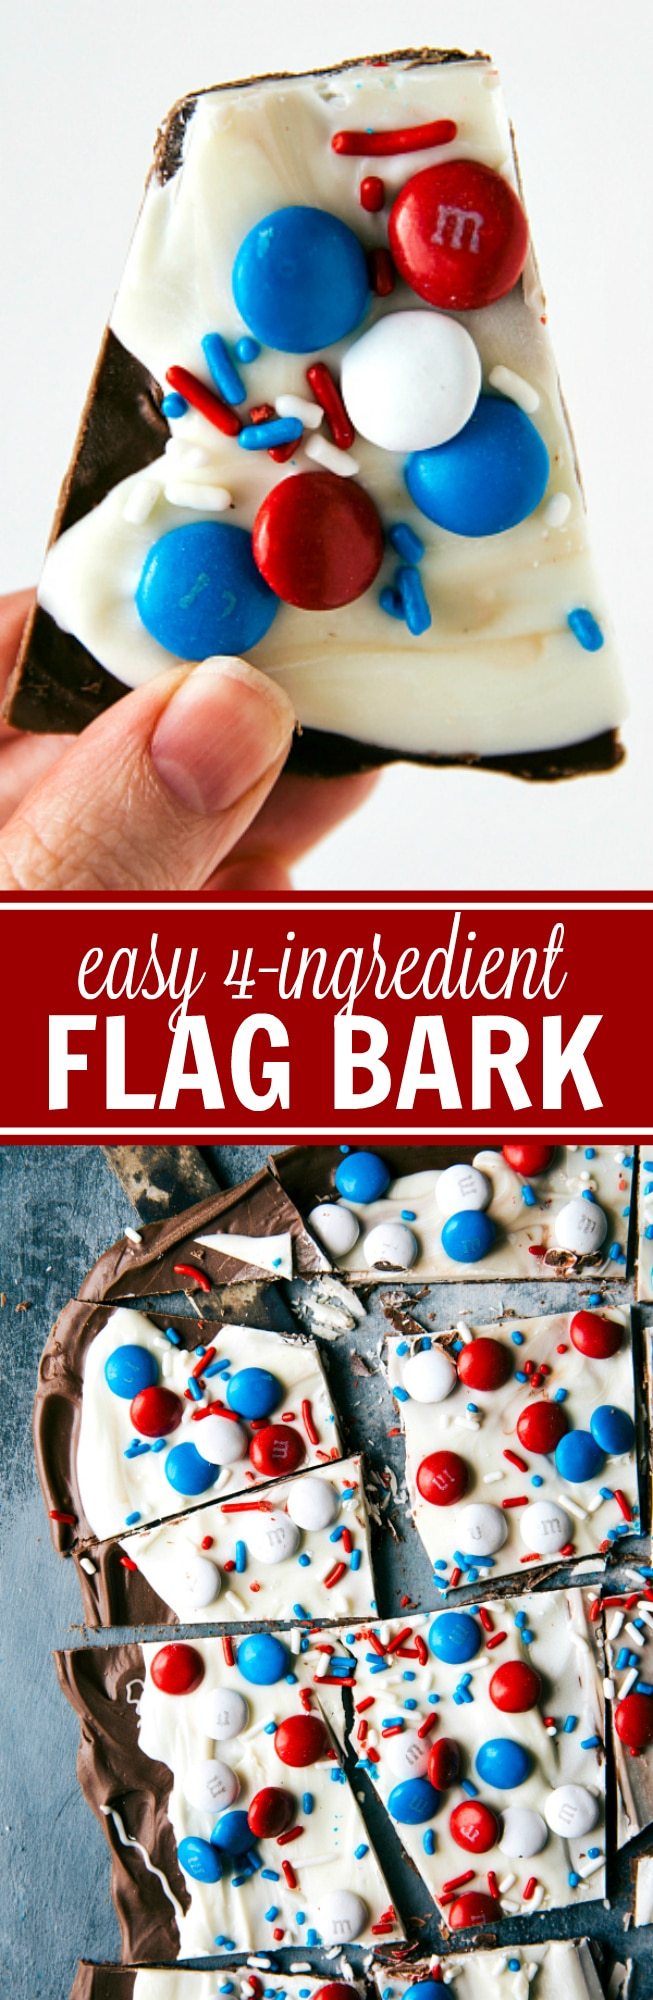 FOUR INGREDIENT Patriotic Fourth of July or Memorial Day Treat! Flag bark made with only 4 easy ingredients. This bark is no bake, quick to assemble, and kid friendly! Recipe is from chelseasmessyapron.com